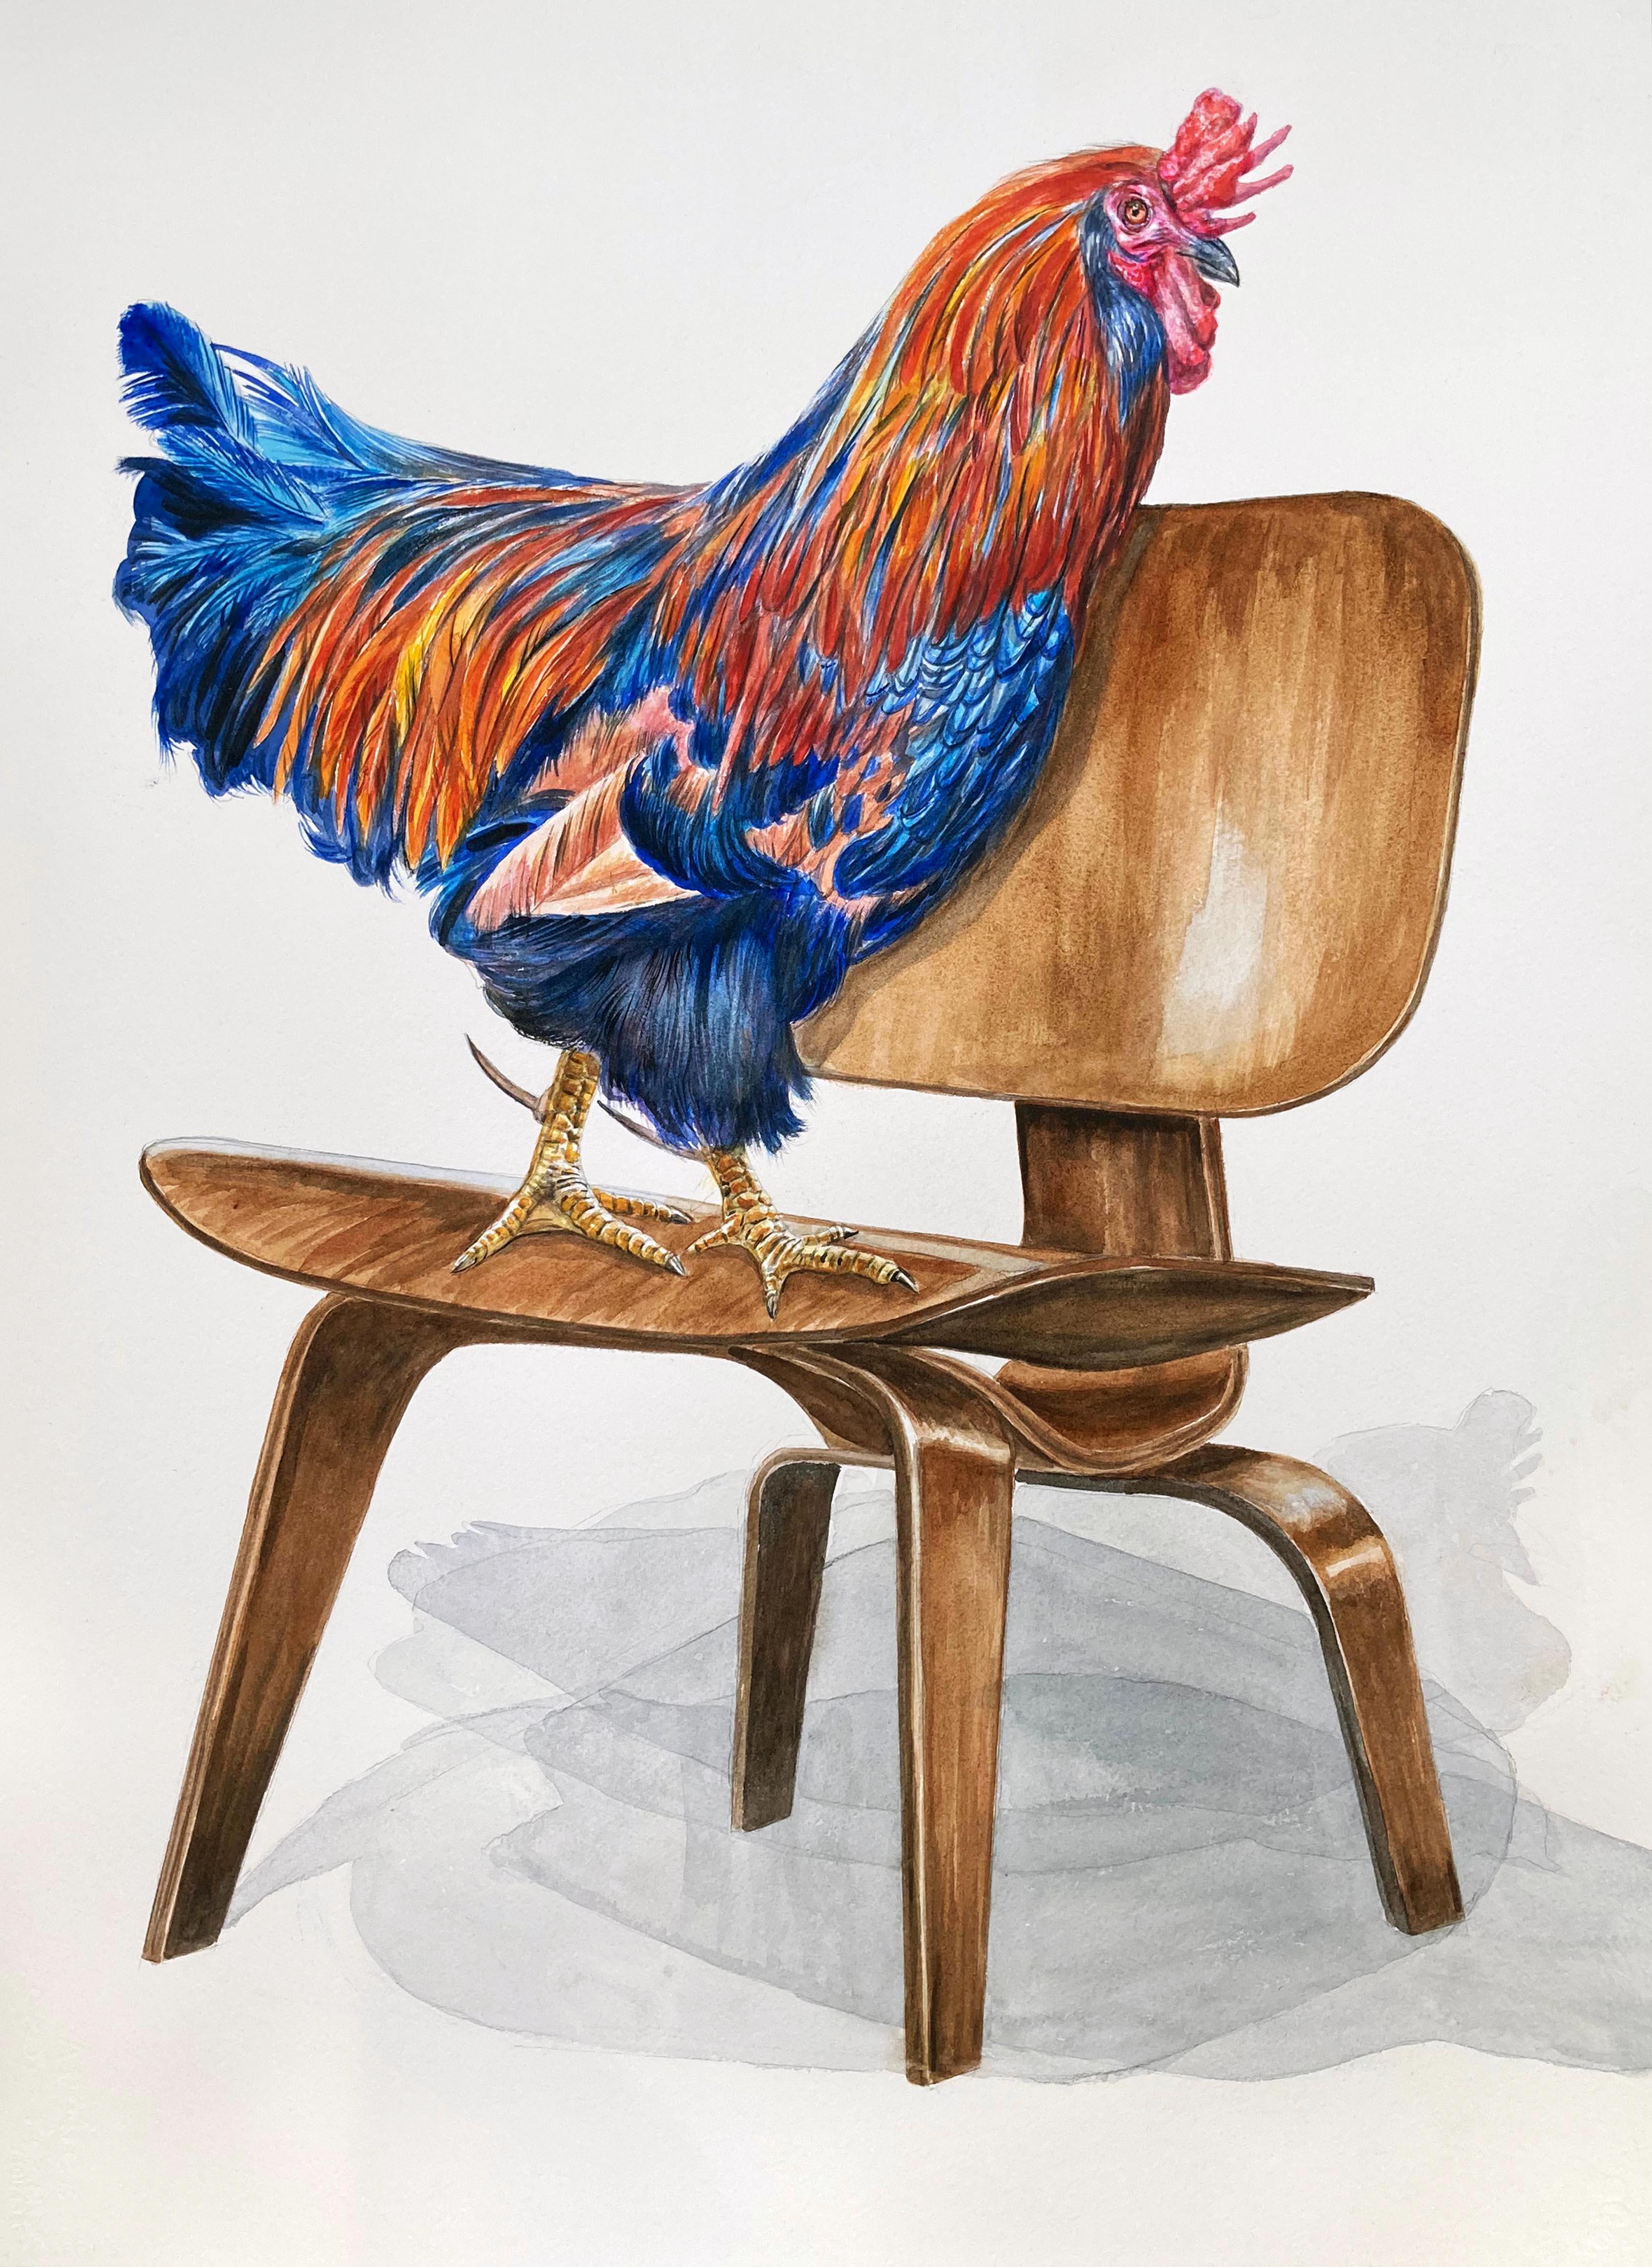 "Rooster on Chair" Colorful Gamecock on Modernist Bend Wood Chair, watercolor